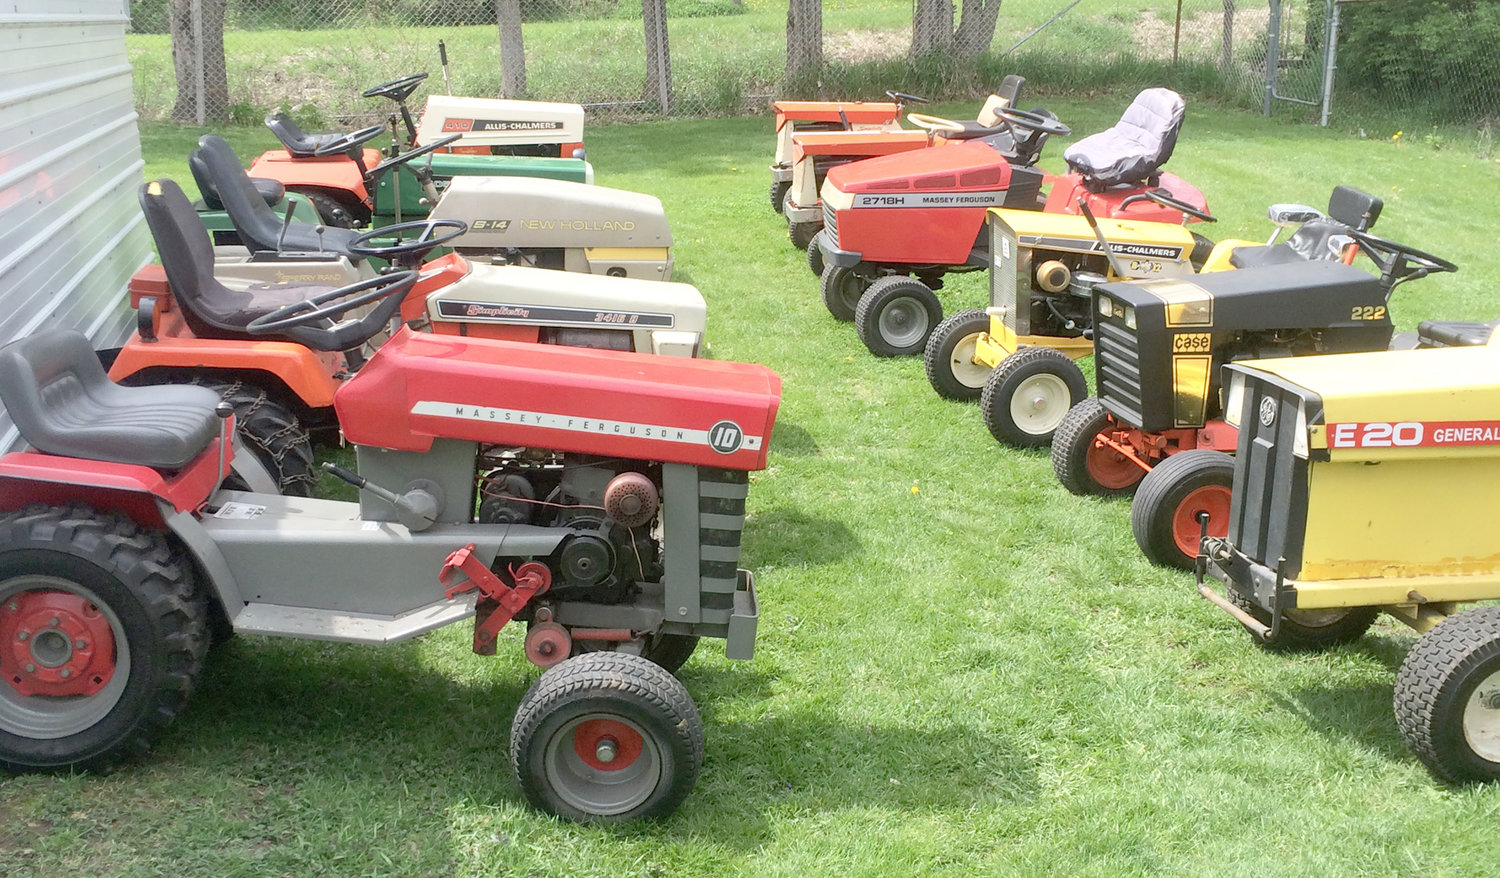 Rev Up Your Garden Tractor For July 6 Princeton Show North Scott